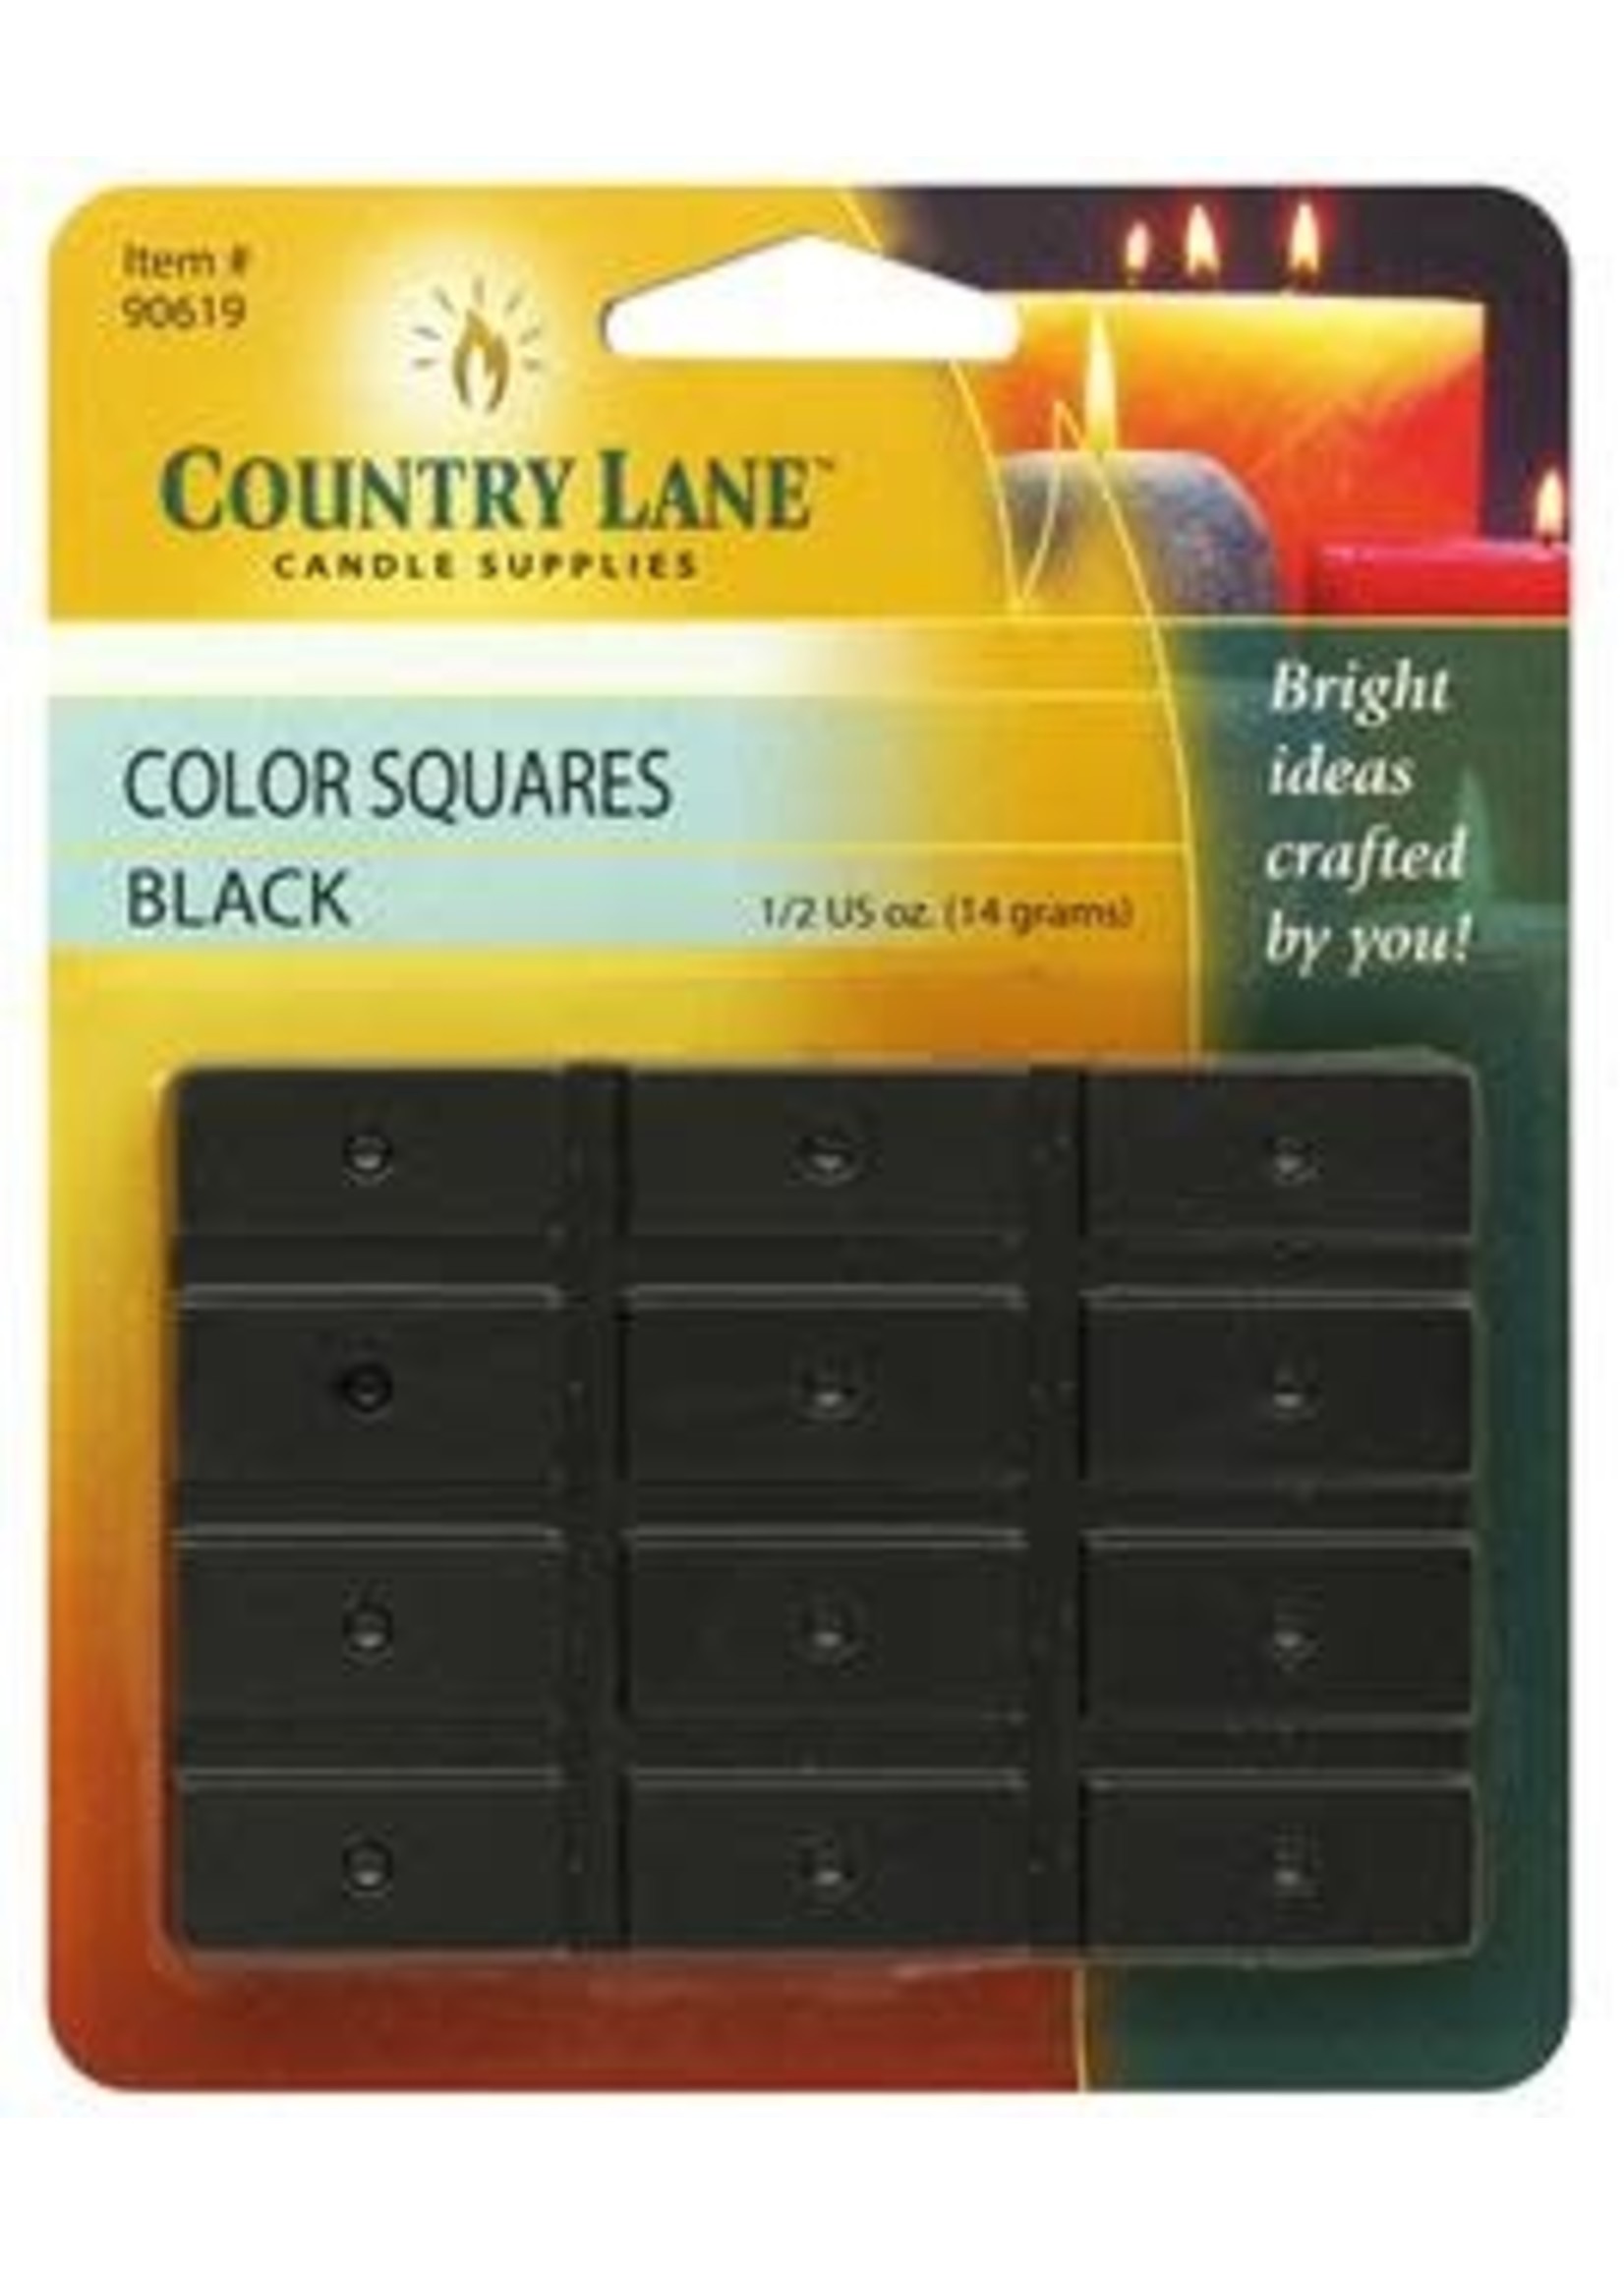 Country Lane Candle Color Squares .5oz Black